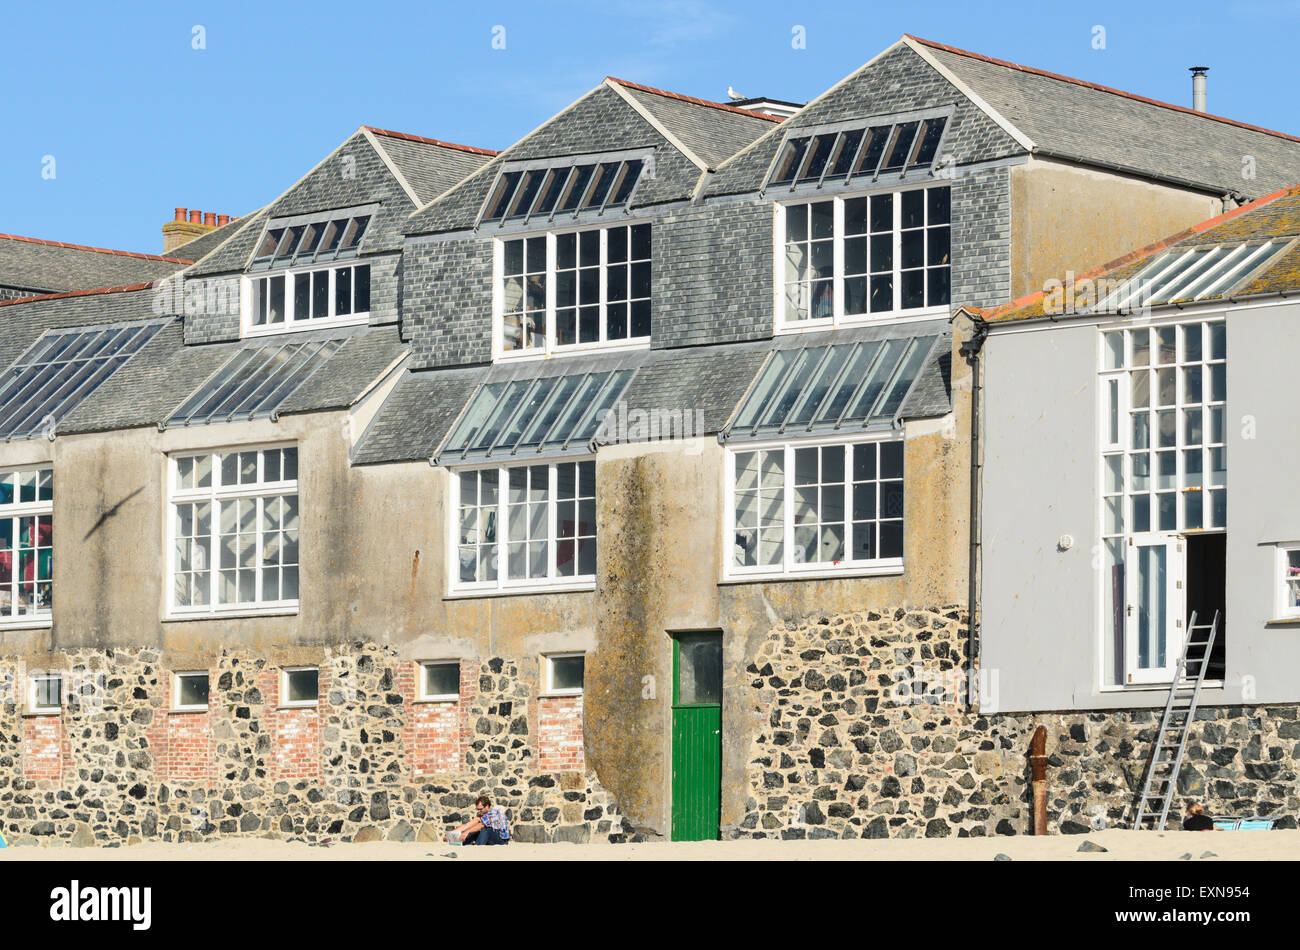 The view of Porthmeor Studios from Porthmeor Beach, St Ives, Cornwall. The studios are converted fisherman's lofts. Stock Photo